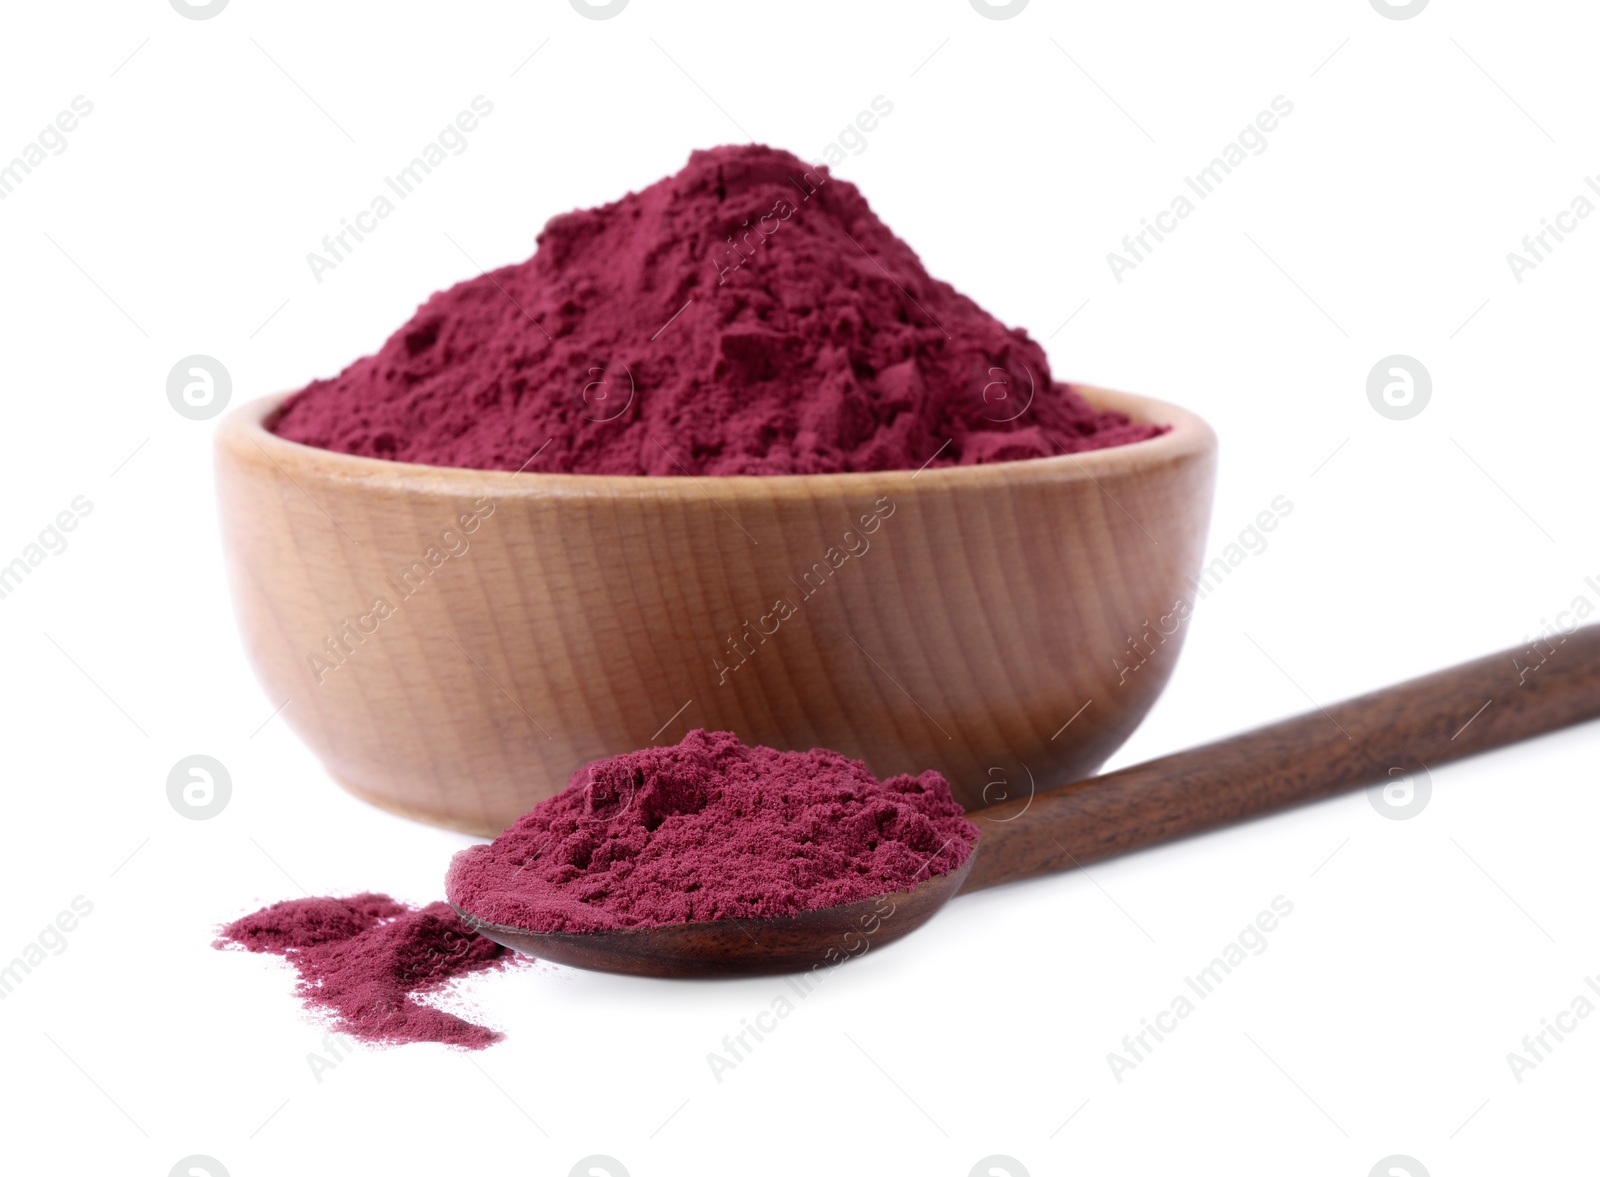 Photo of Wooden spoon and bowl of acai powder on white background